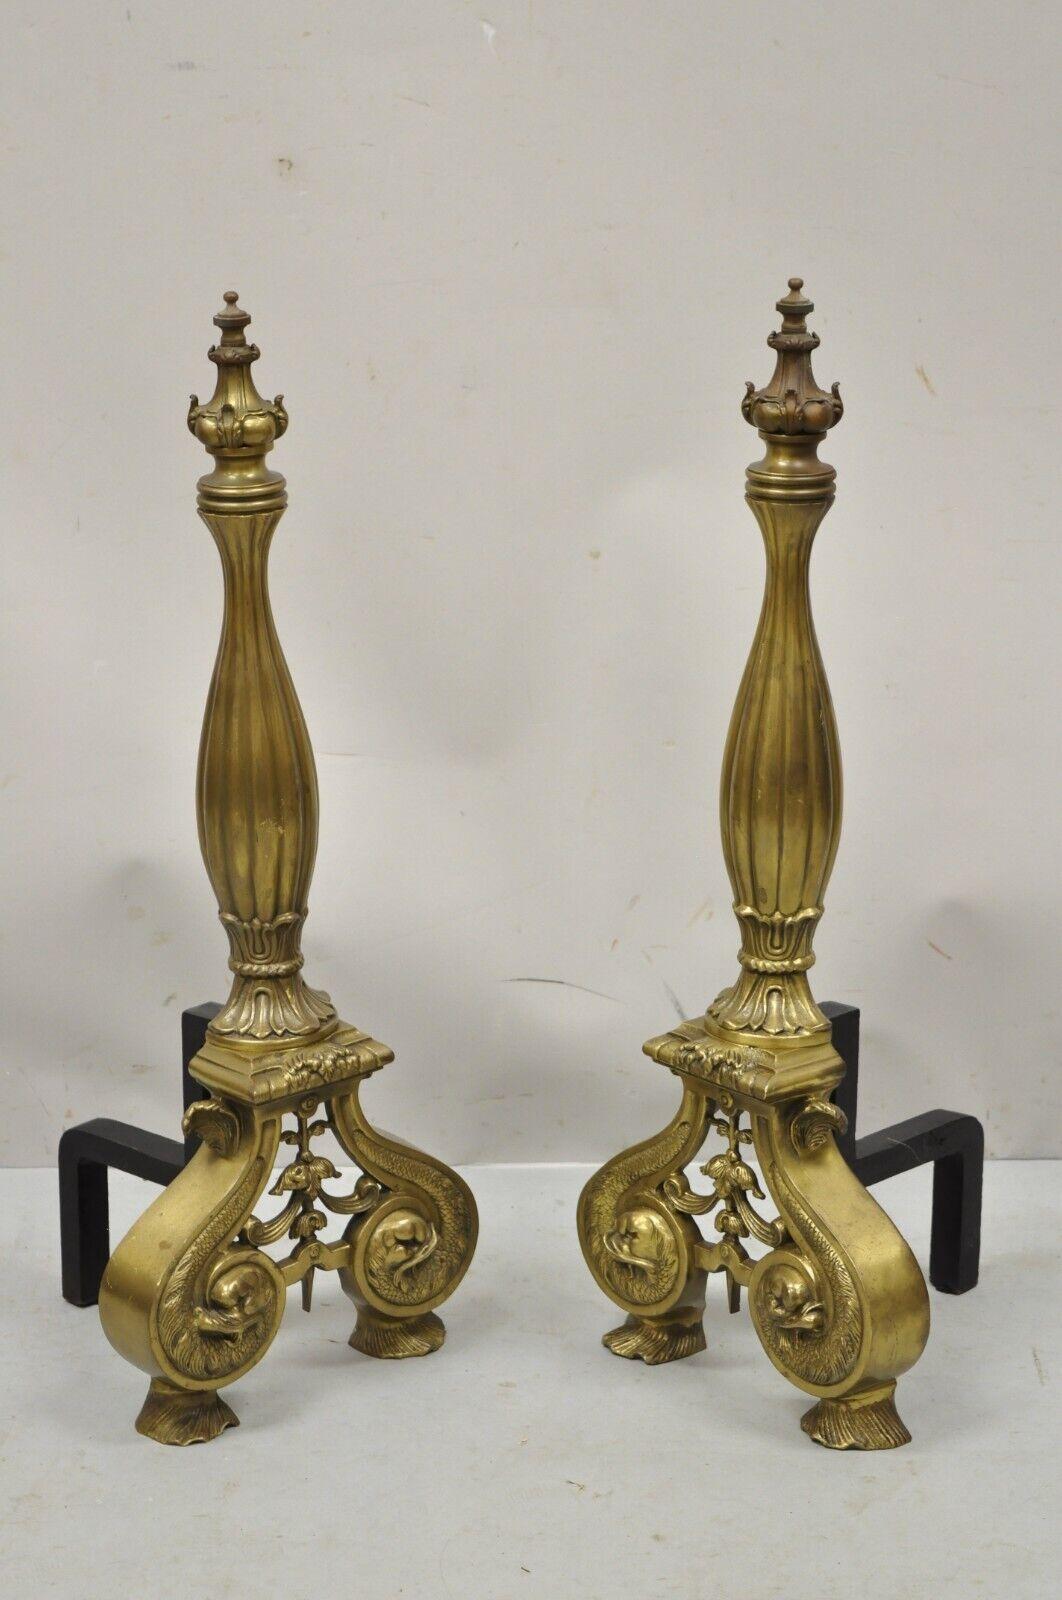 Vintage French Empire Style Dolphin Head Bronze Brass Fireplace Andirons - a Pair. Item features dolphin heads, cast bronze forms, ornate finial, cast iron supports, very nice pair. Circa late 20th century. Measurements: 27.5